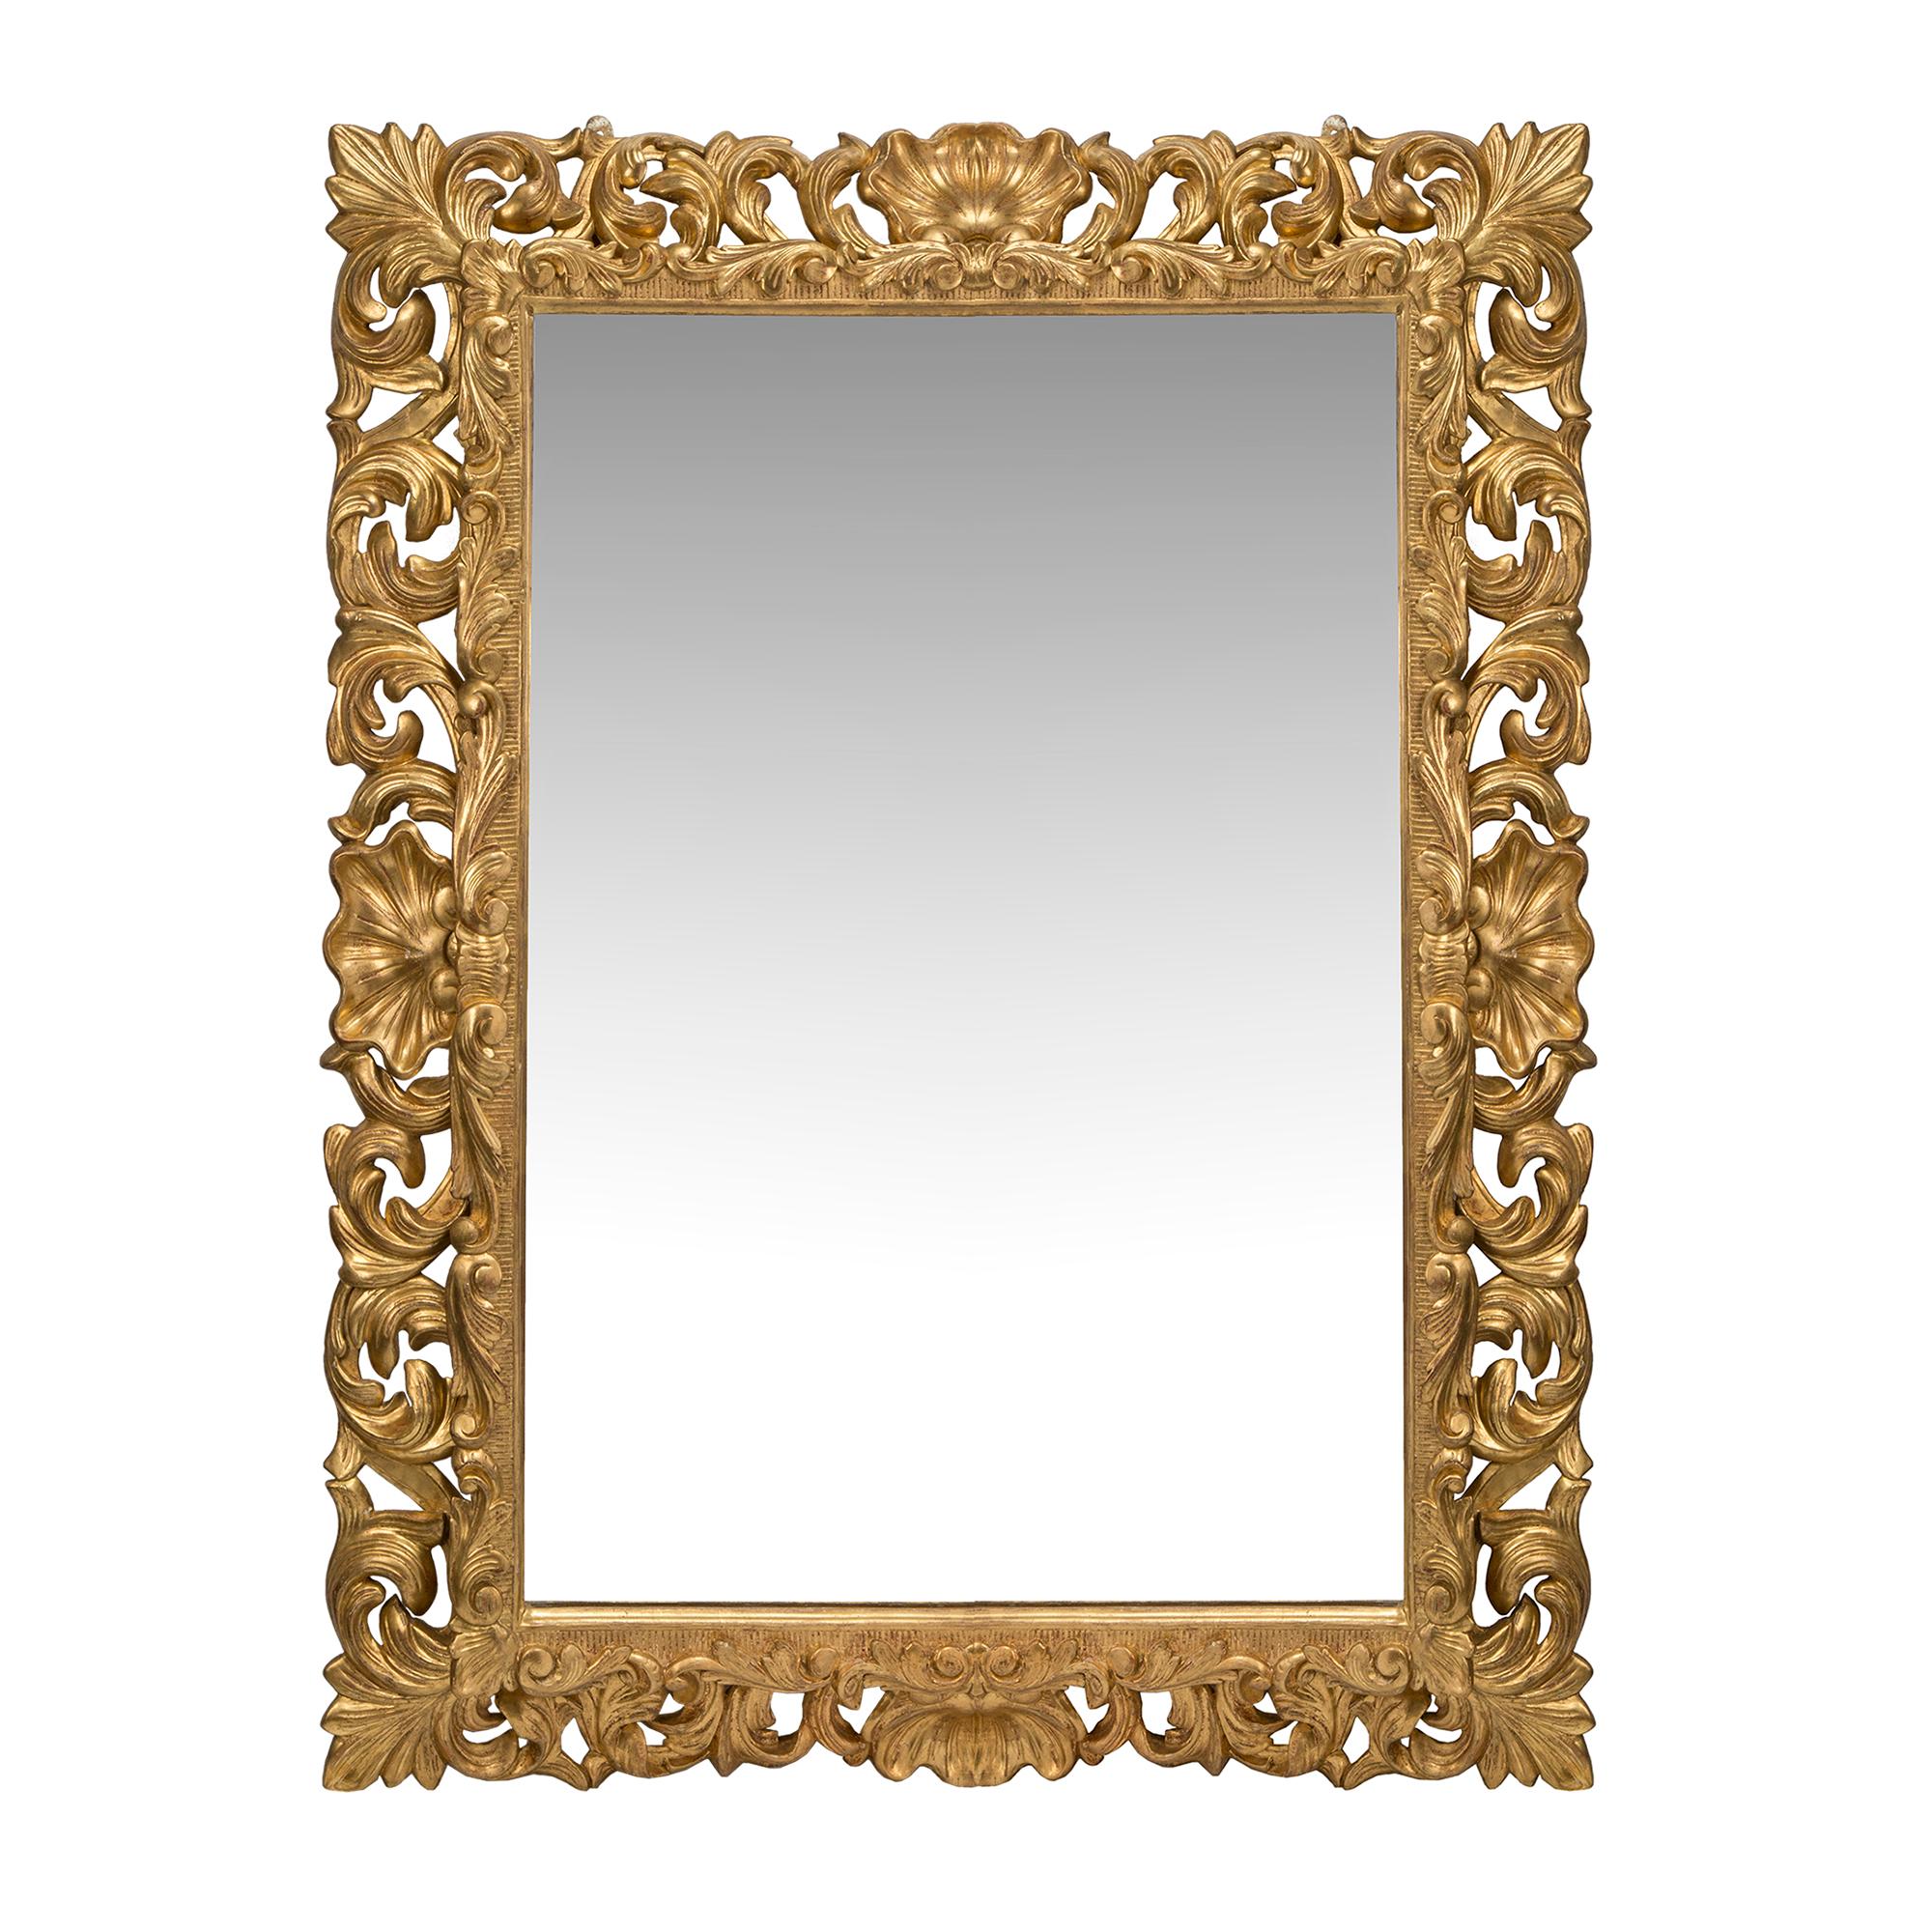 A stunning Italian 19th century giltwood mirror from Florence. The finely carved pierced frame is centered at each side with a large seashell cabochon and accented at each corner with large acanthus leaves. The wonderful scrolled foliate continues